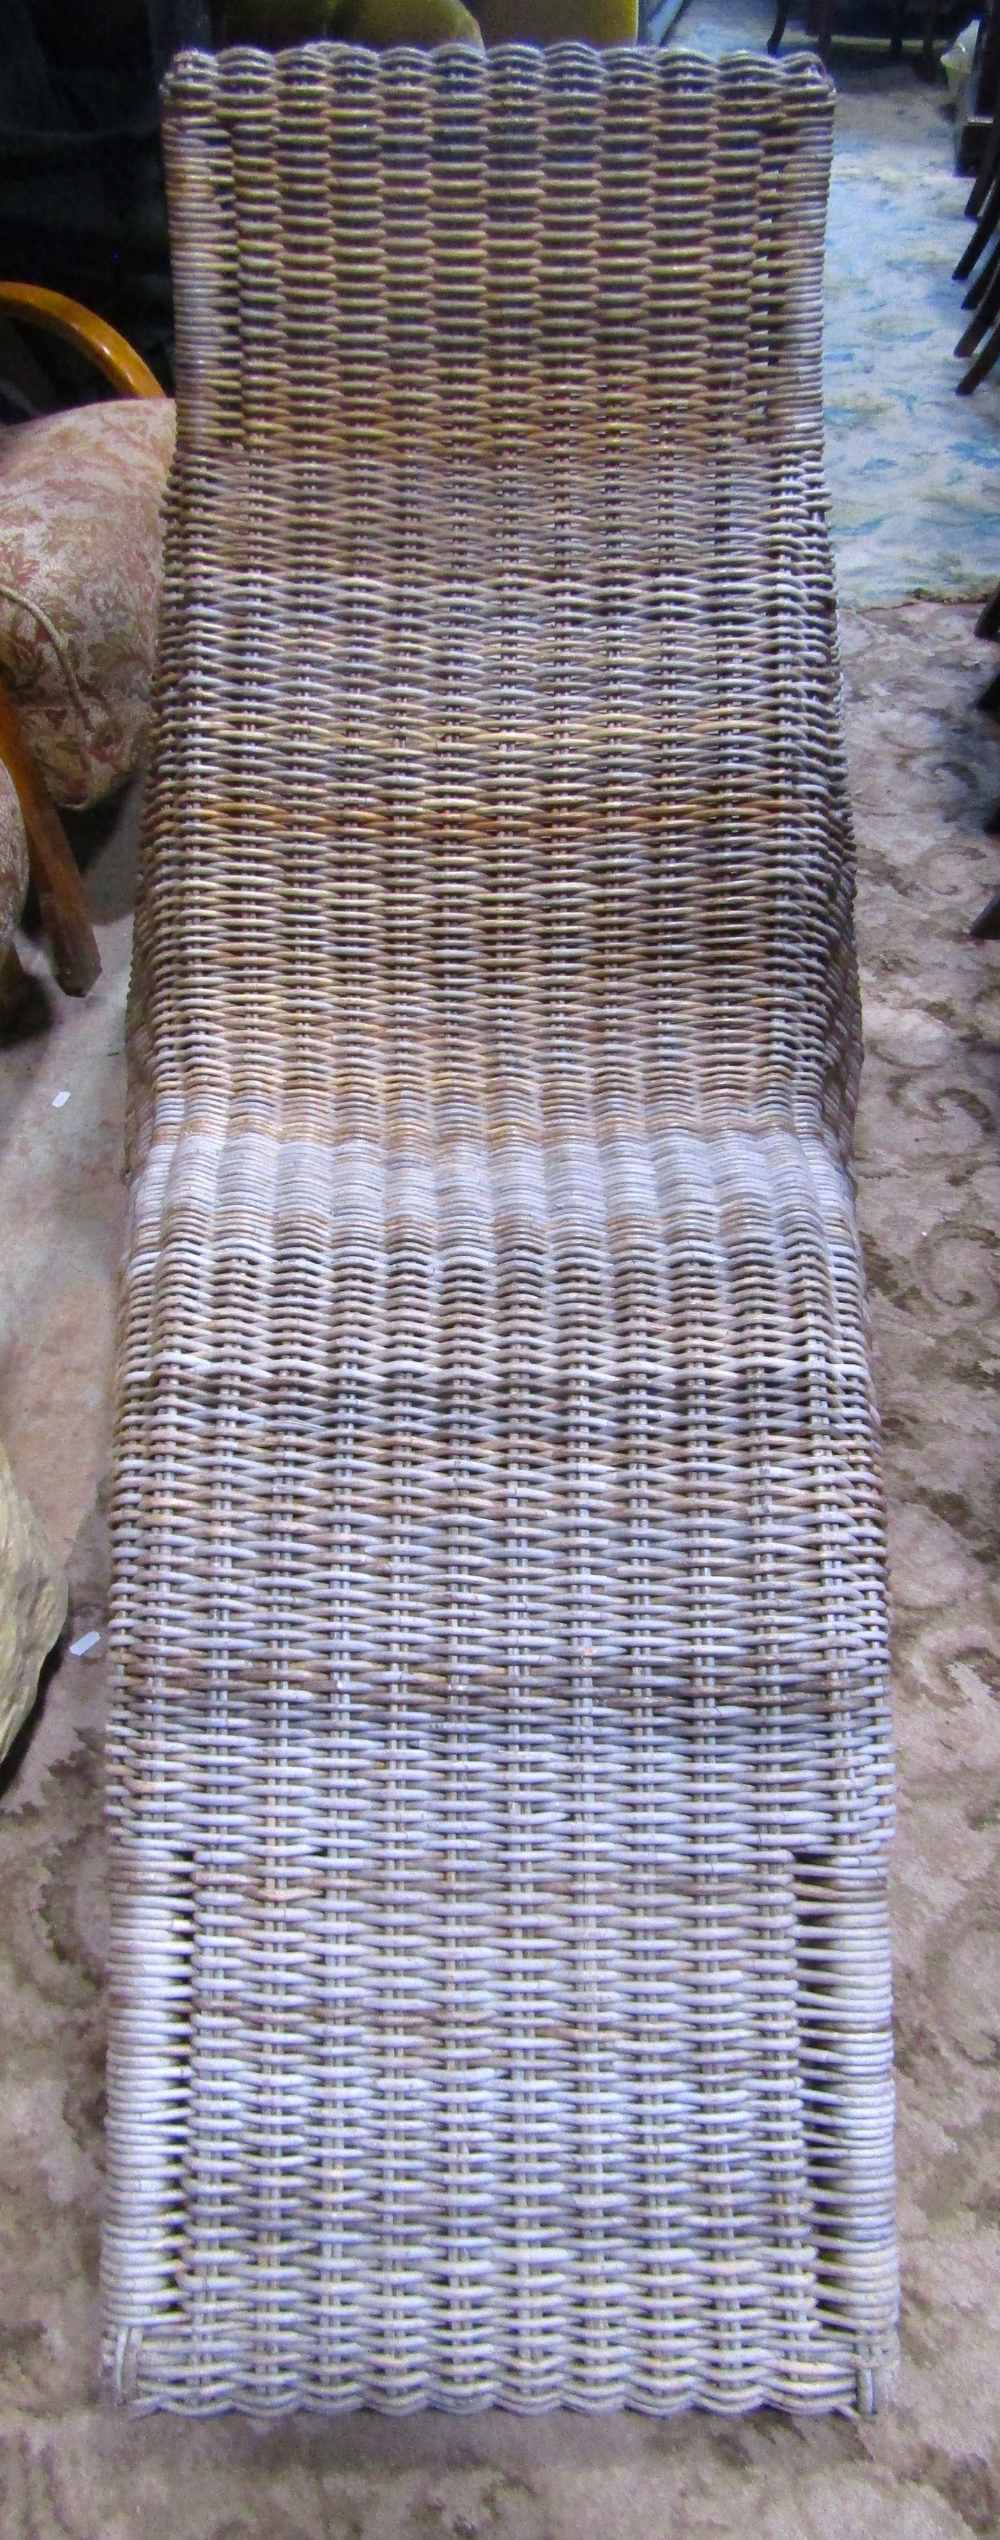 A wicker conservatory/garden lounger with shaped outline